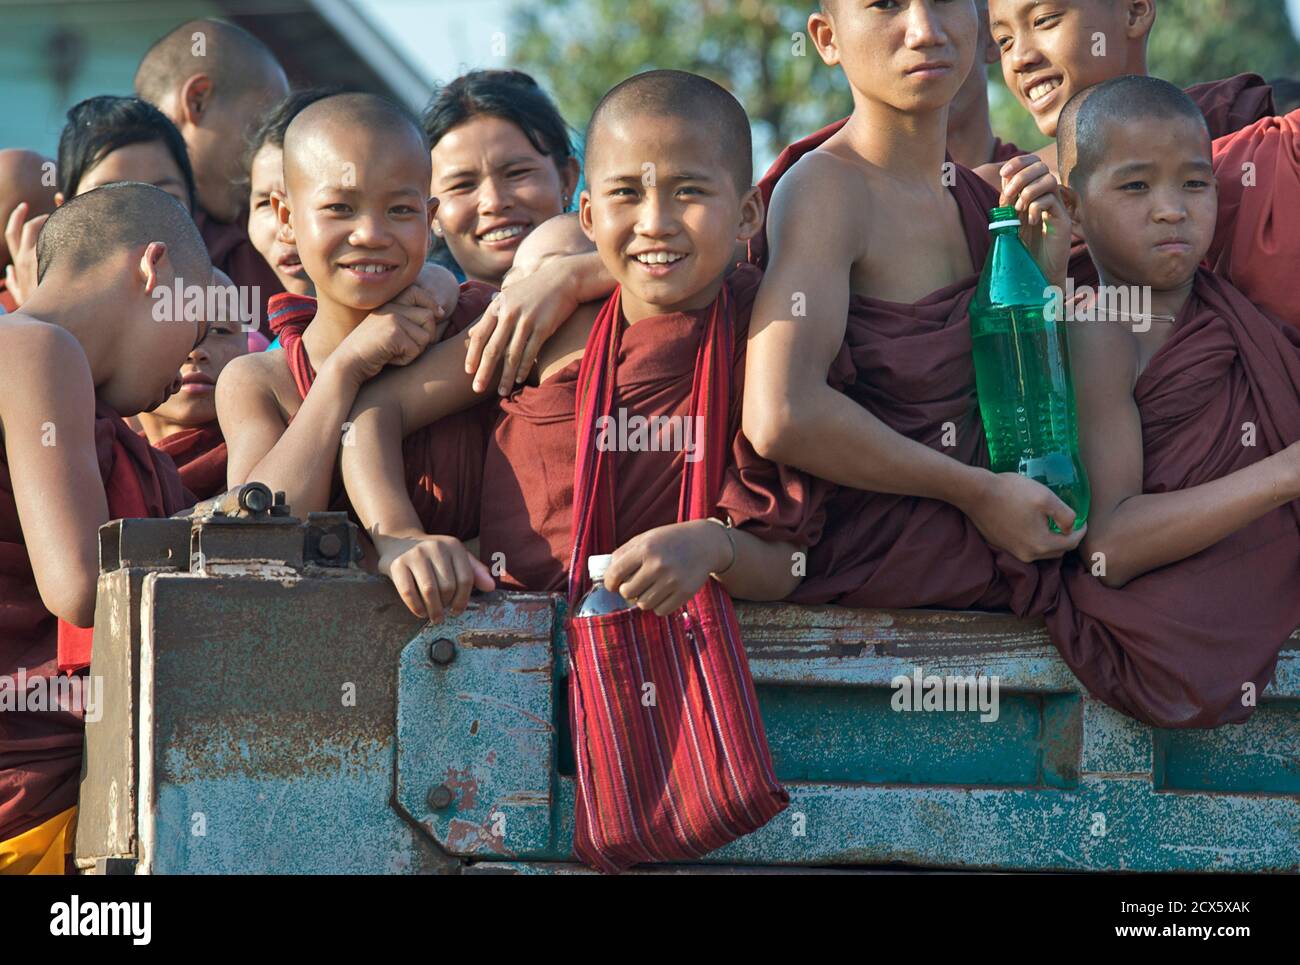 Burmese buddhist novice monks travelling together in the back of a truck during water festival celebrations, Kalaw, Burma Stock Photo